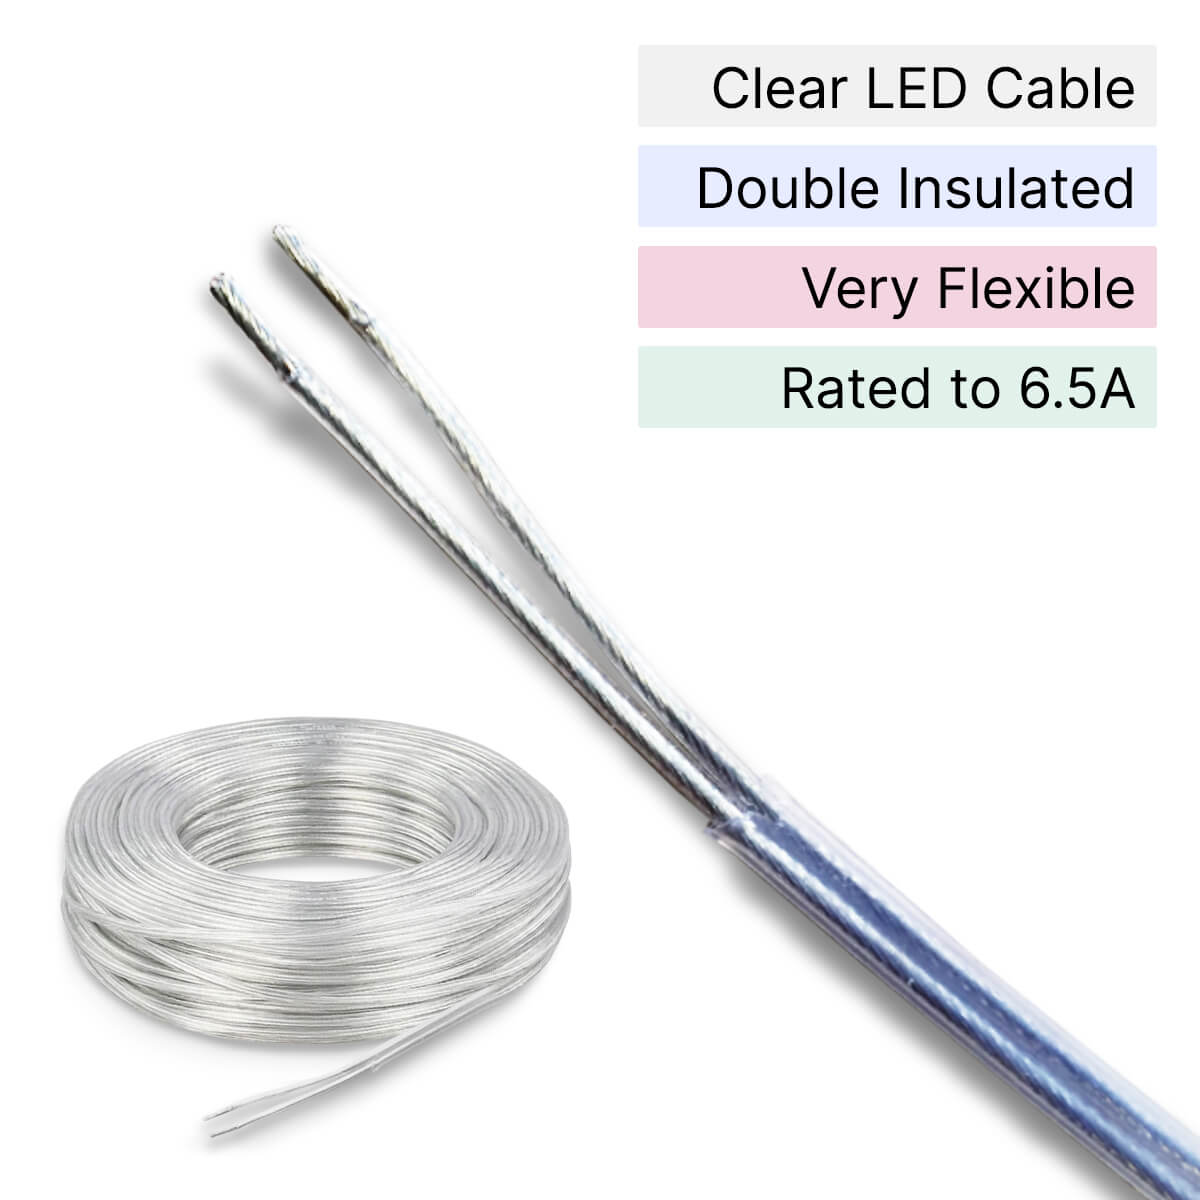 Clear LED Cable 6.5A High Rated